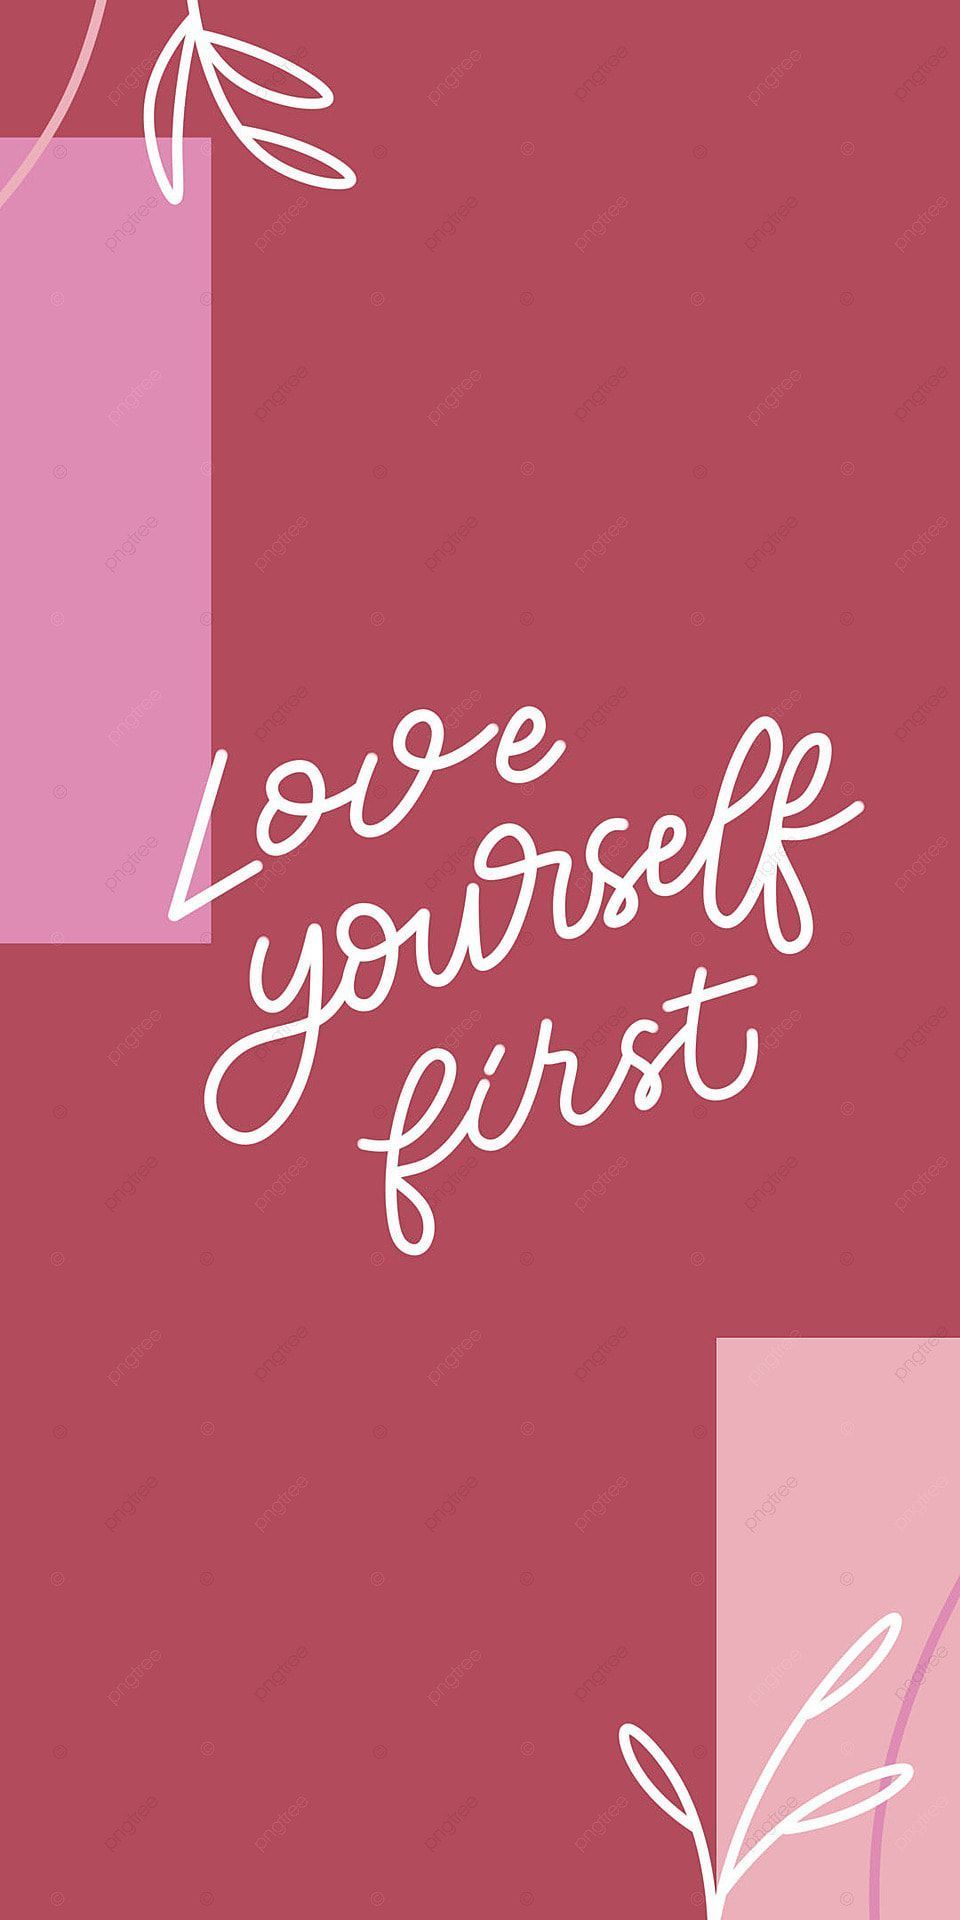 Love Yourself First Motivation Quotes Phone Wallpaper Background Wallpaper Image For Free Download